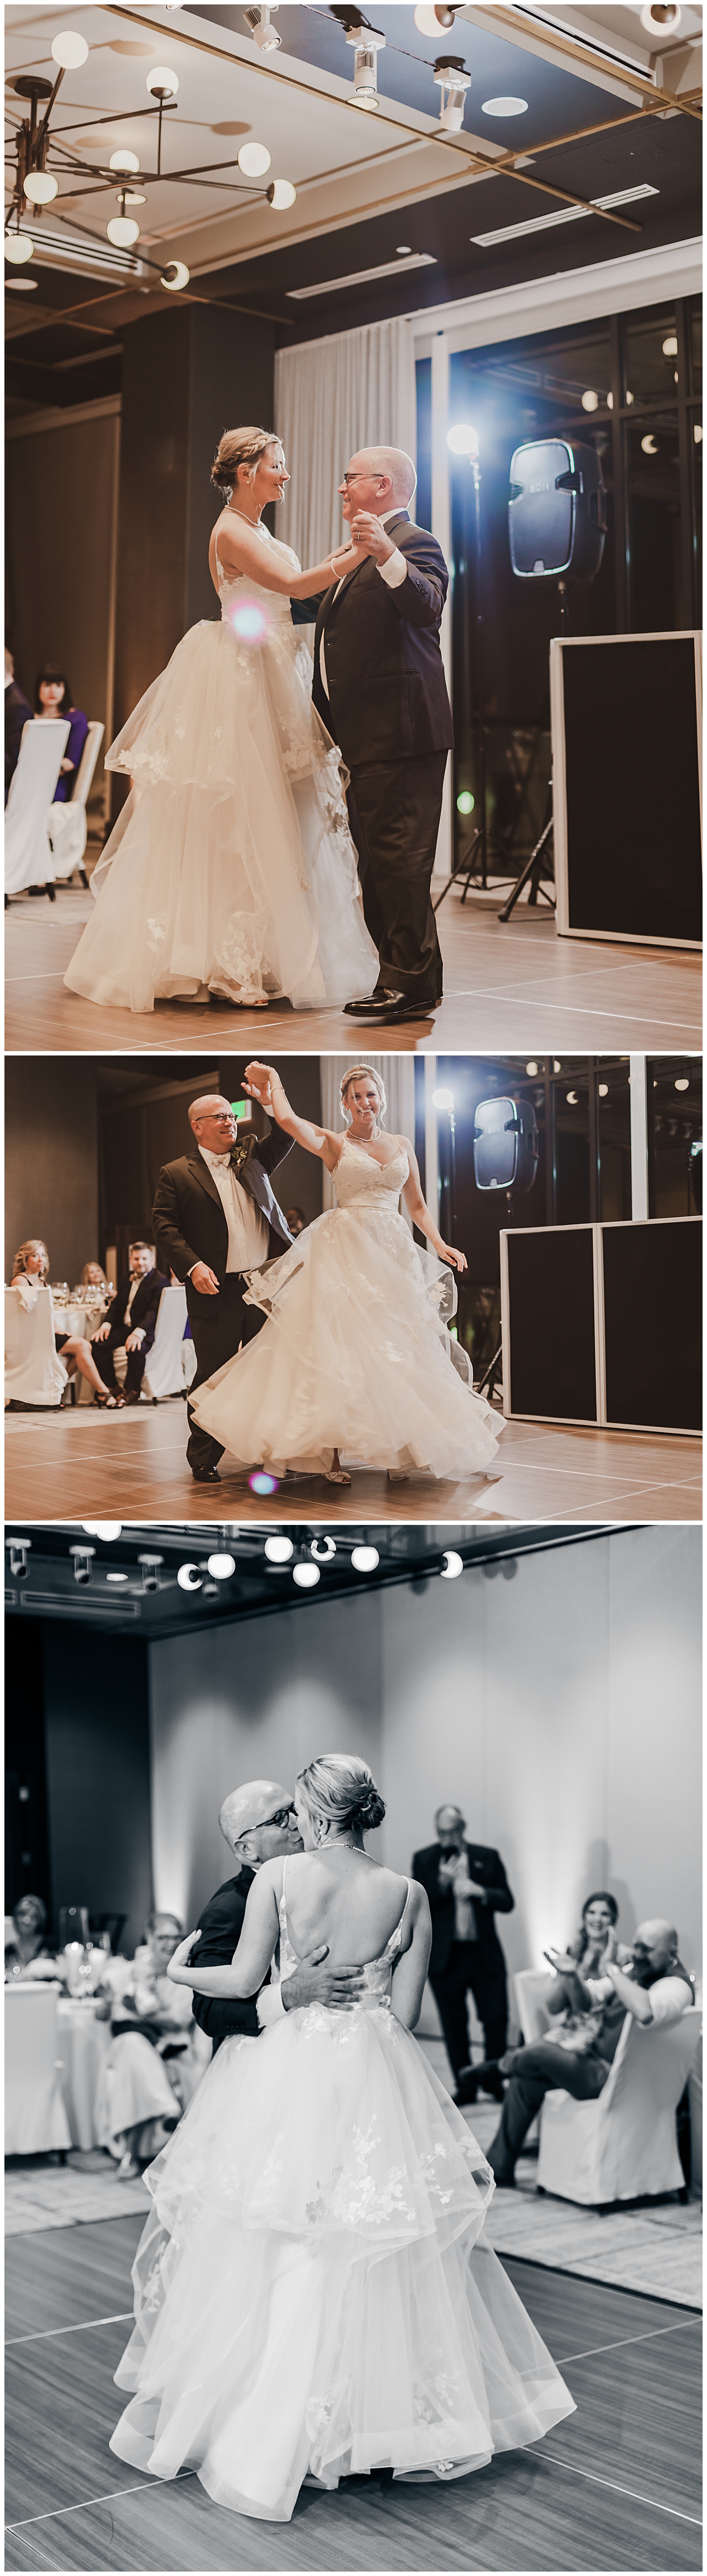 a couple's first dance during wedding reception